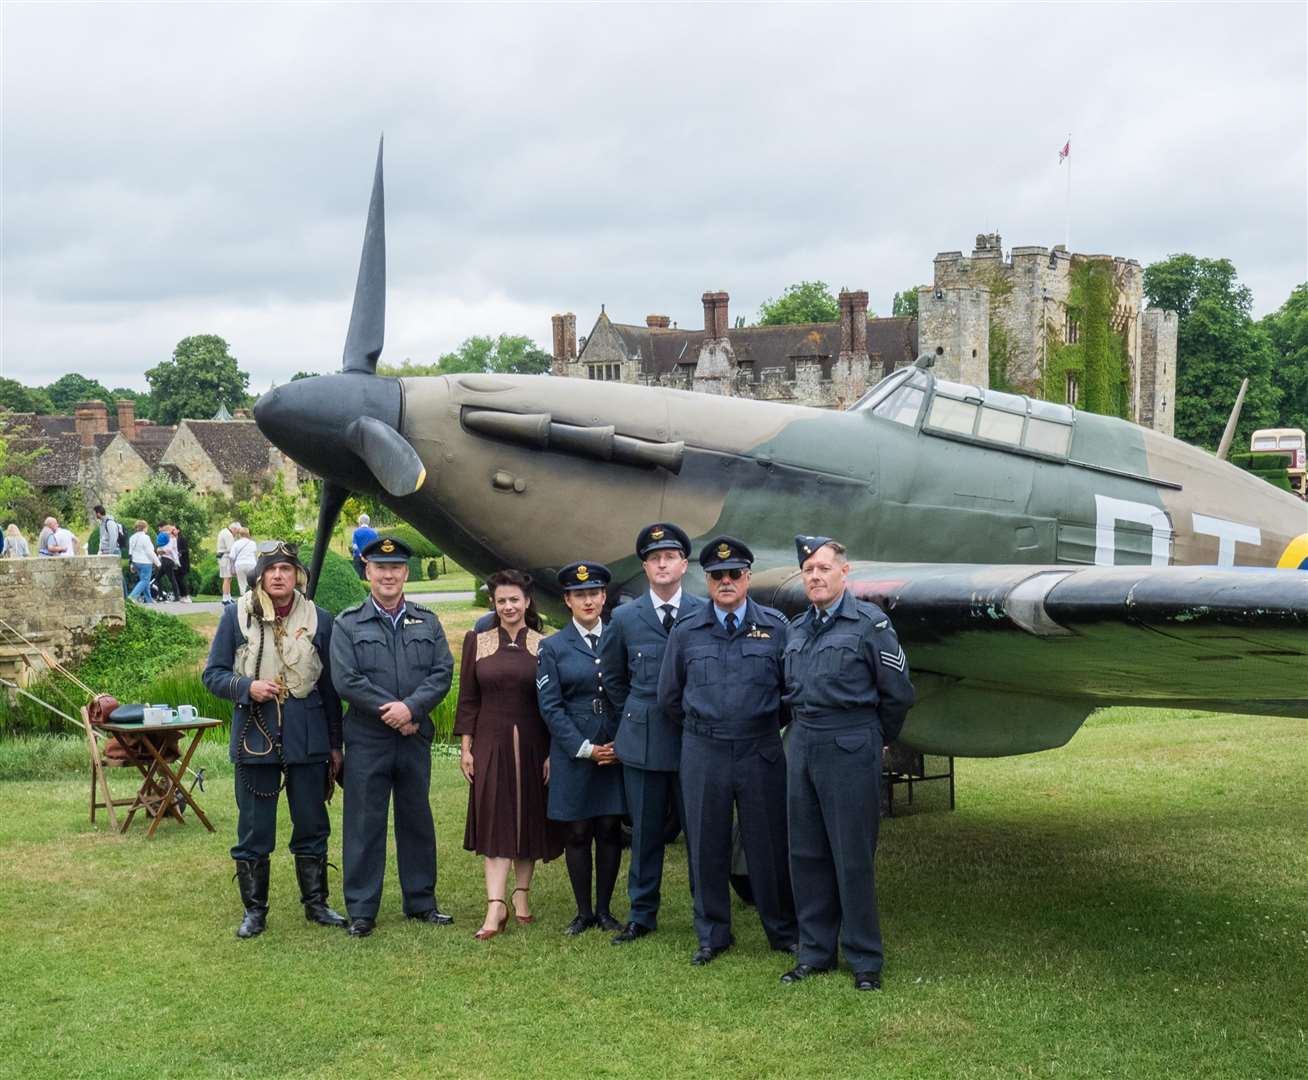 A grounded Spitfire will be at Hever Castle for the wartime event